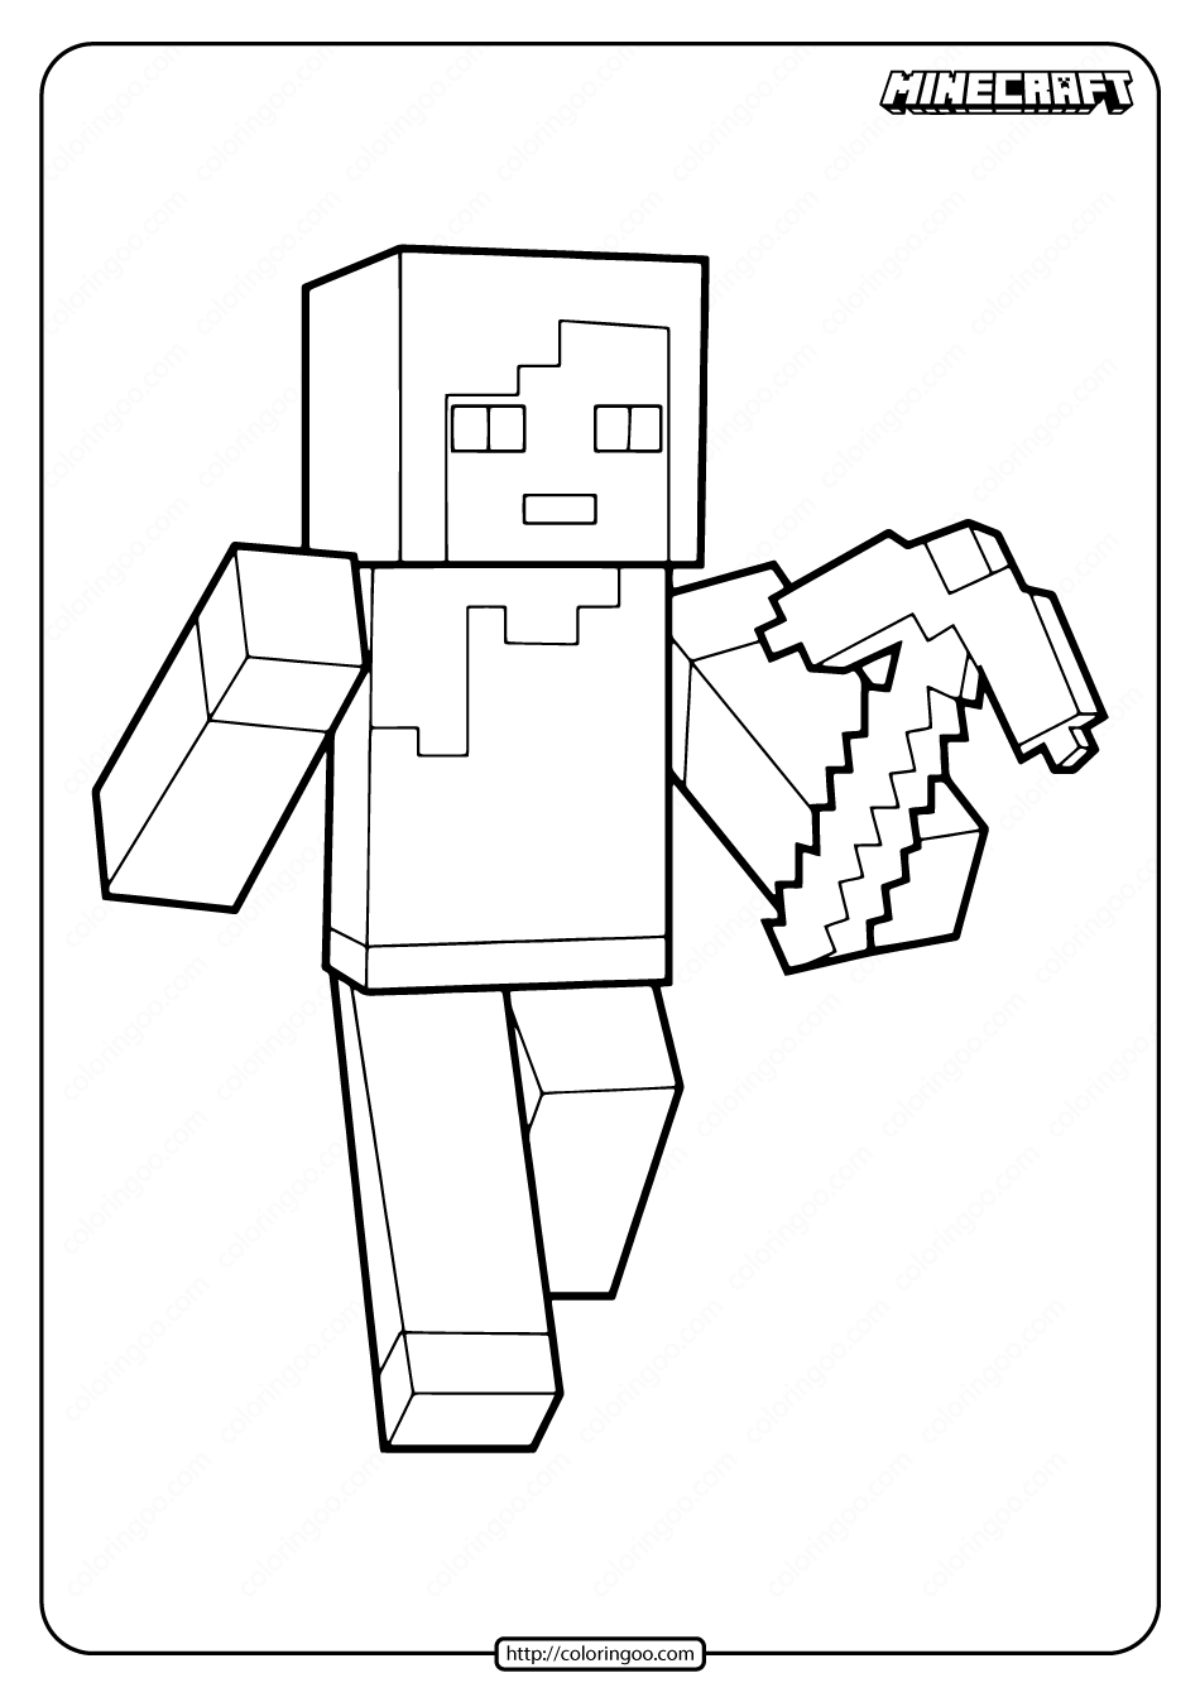 Minecraft Alex with Pickaxe Coloring Pages